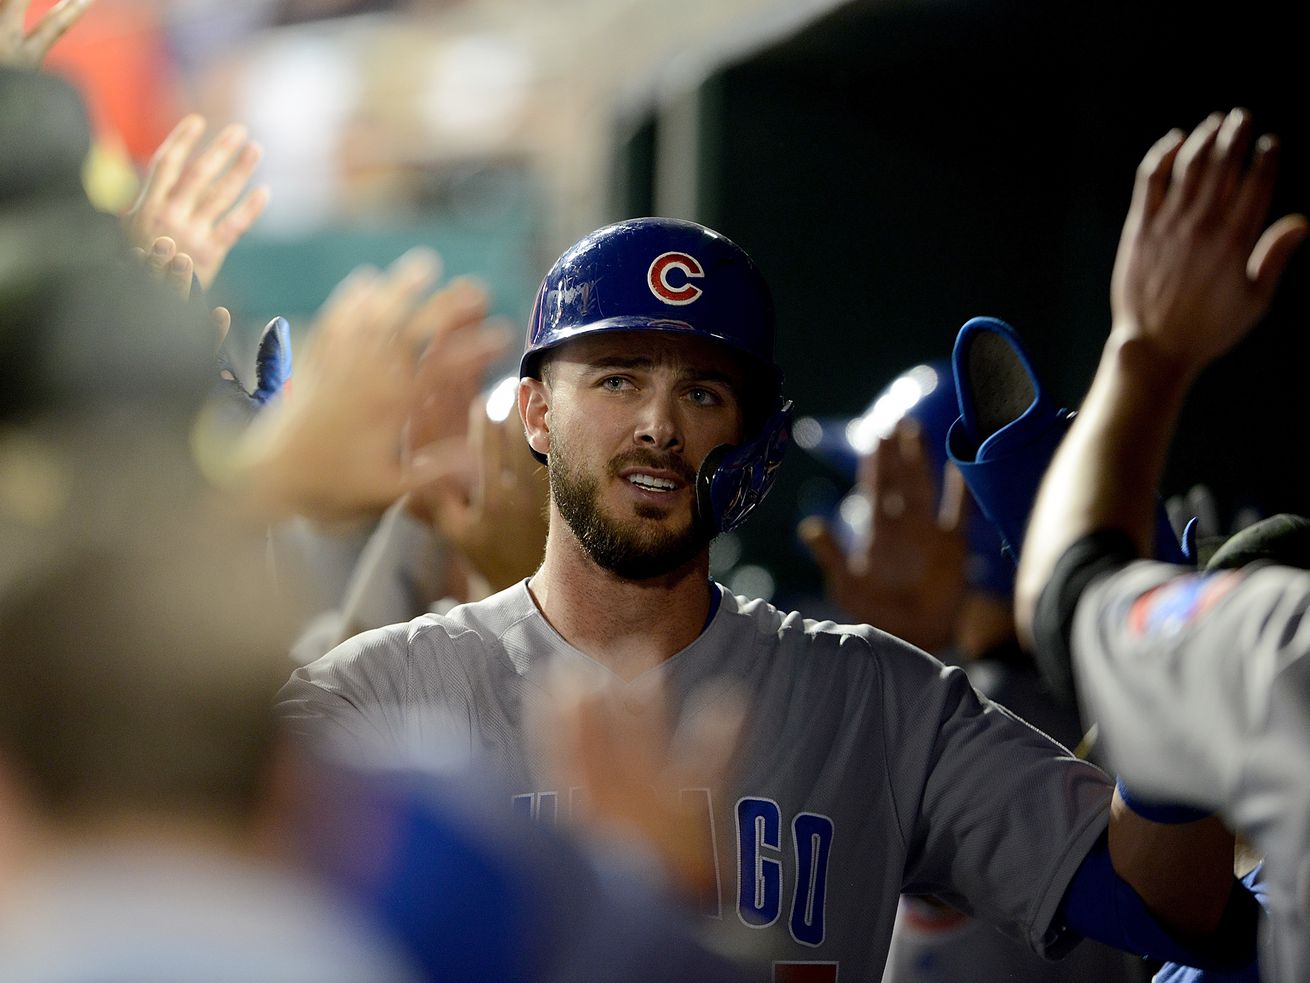 Kris Bryant after hitting a home run in the seventh — the first of three in the final three innings of the Cubs’ 14-6 win over the Nationals.